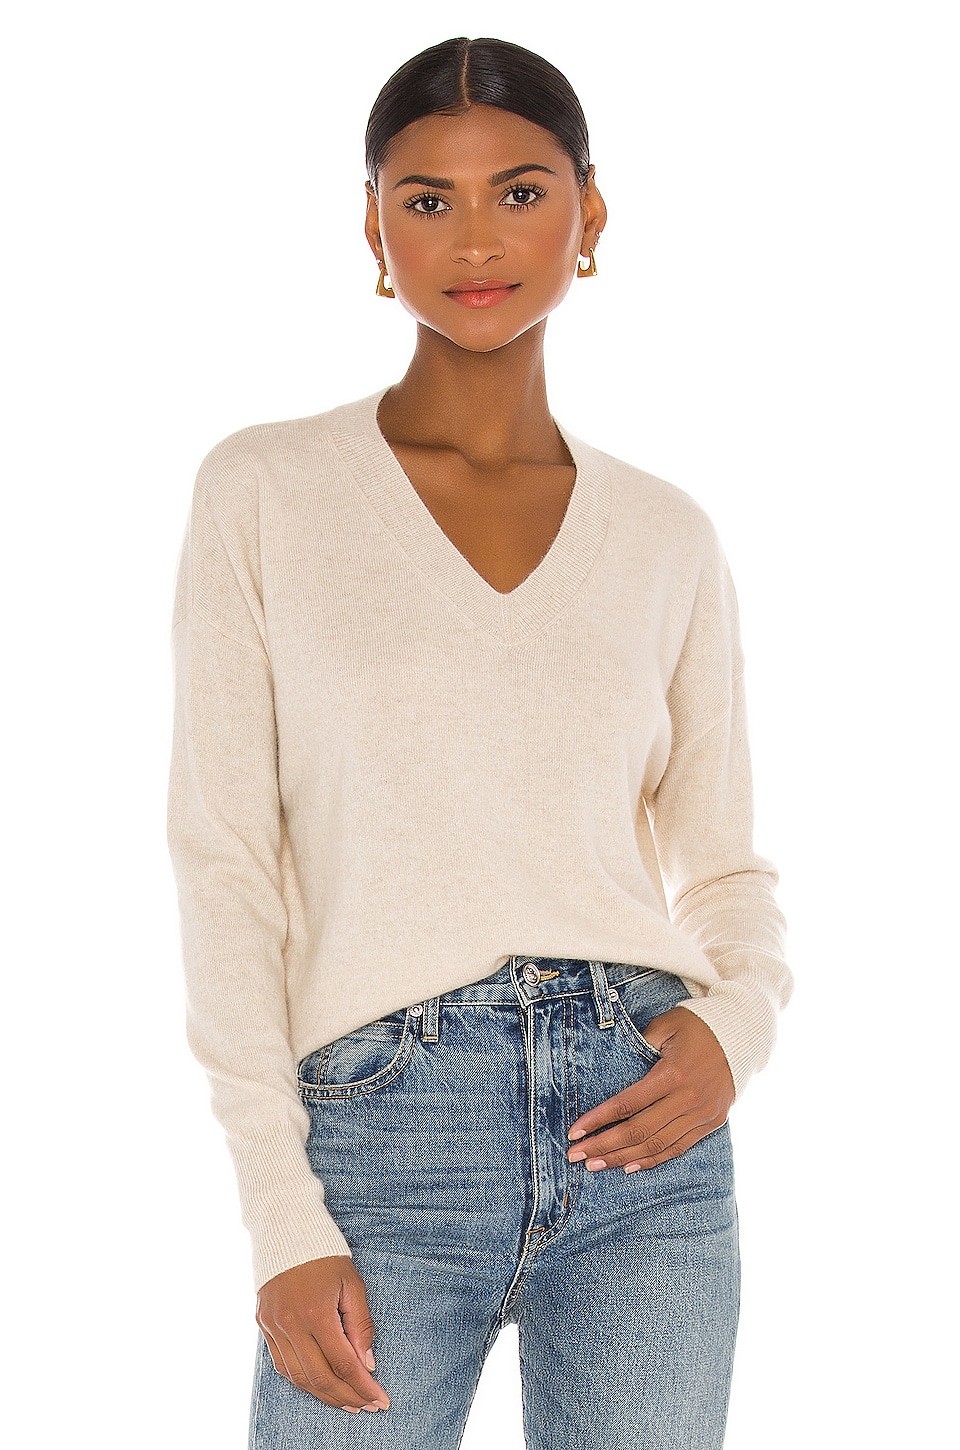 One Grey Day Spencer Cashmere V Neck Sweater in Oatmeal | REVOLVE